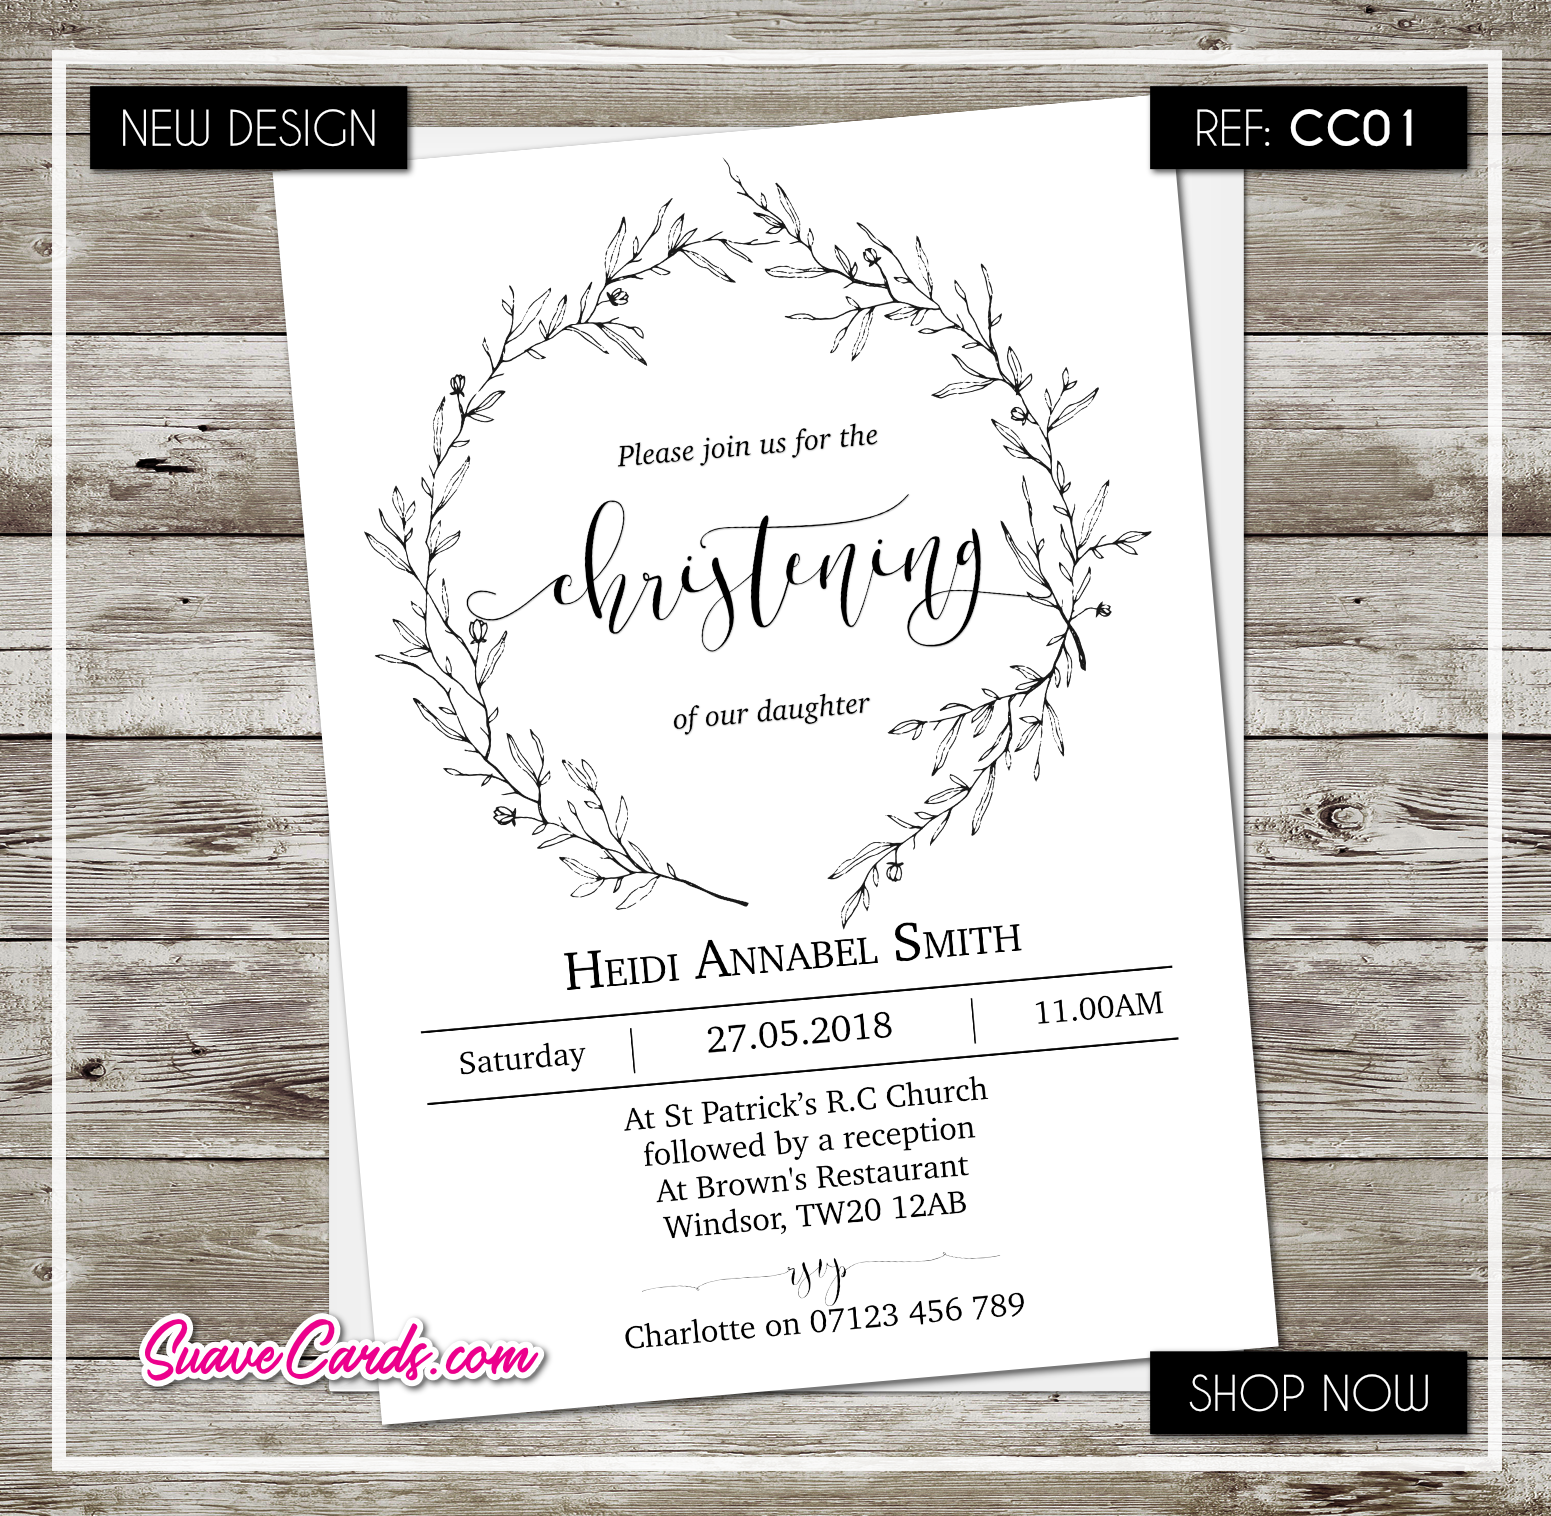 Baptism/Christening/Any Occasion – Floral Wreath Design 3